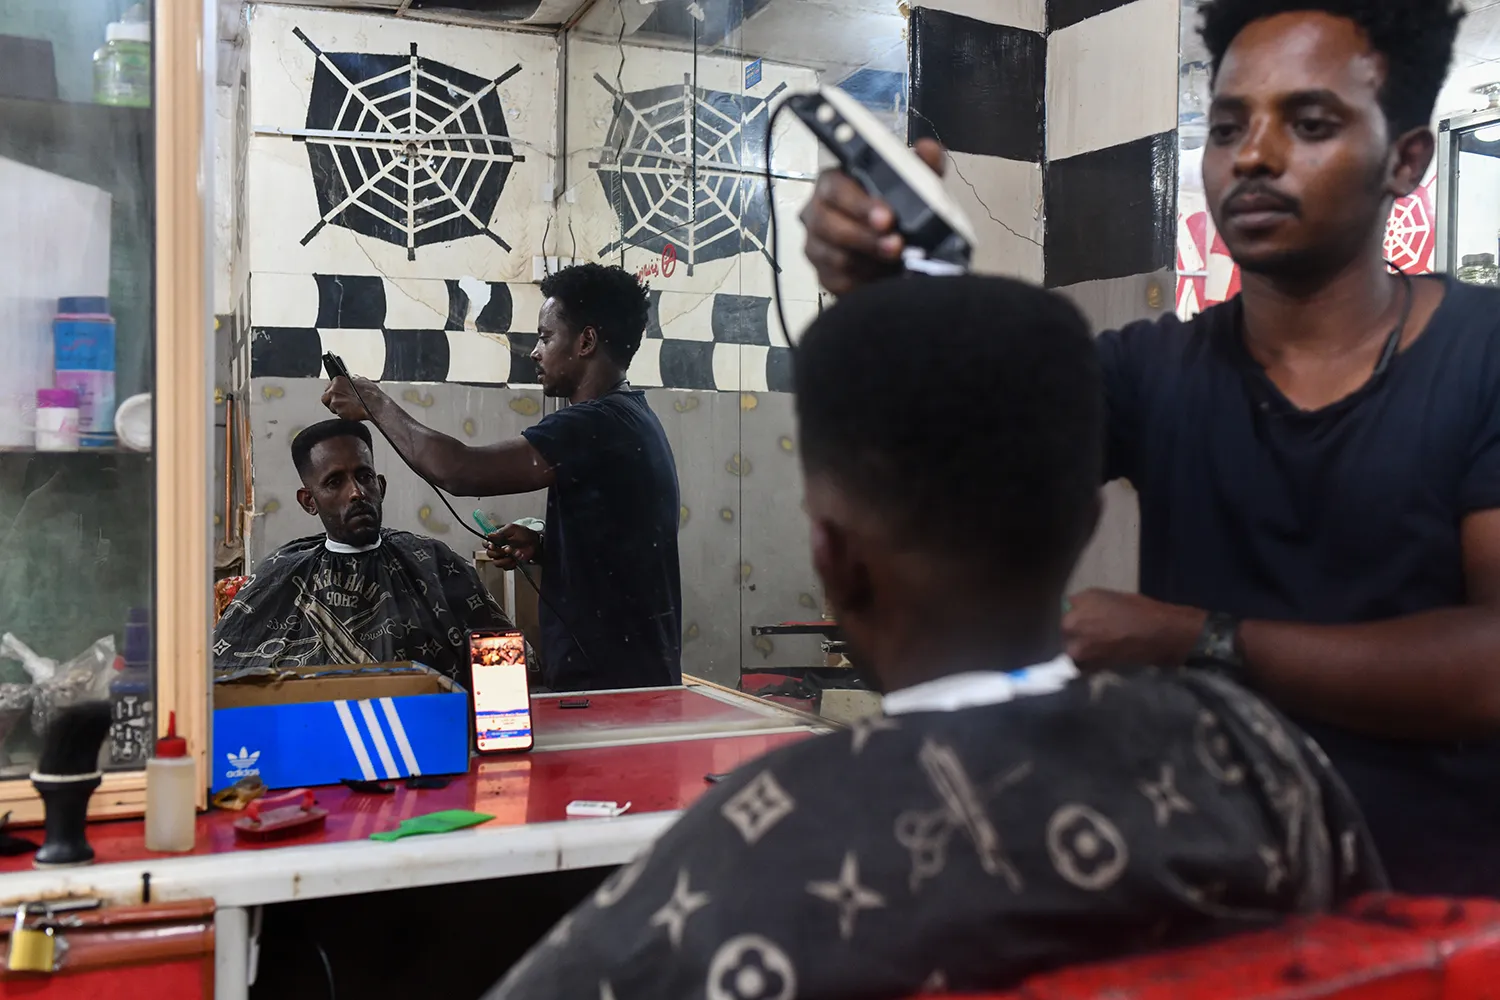 An Eritrean man has his hair cut at a barbershop in Jureif Gharb, a district of Khartoum that for decades hosted the majority of the city’s Eritrean and Ethiopian refugee communities.